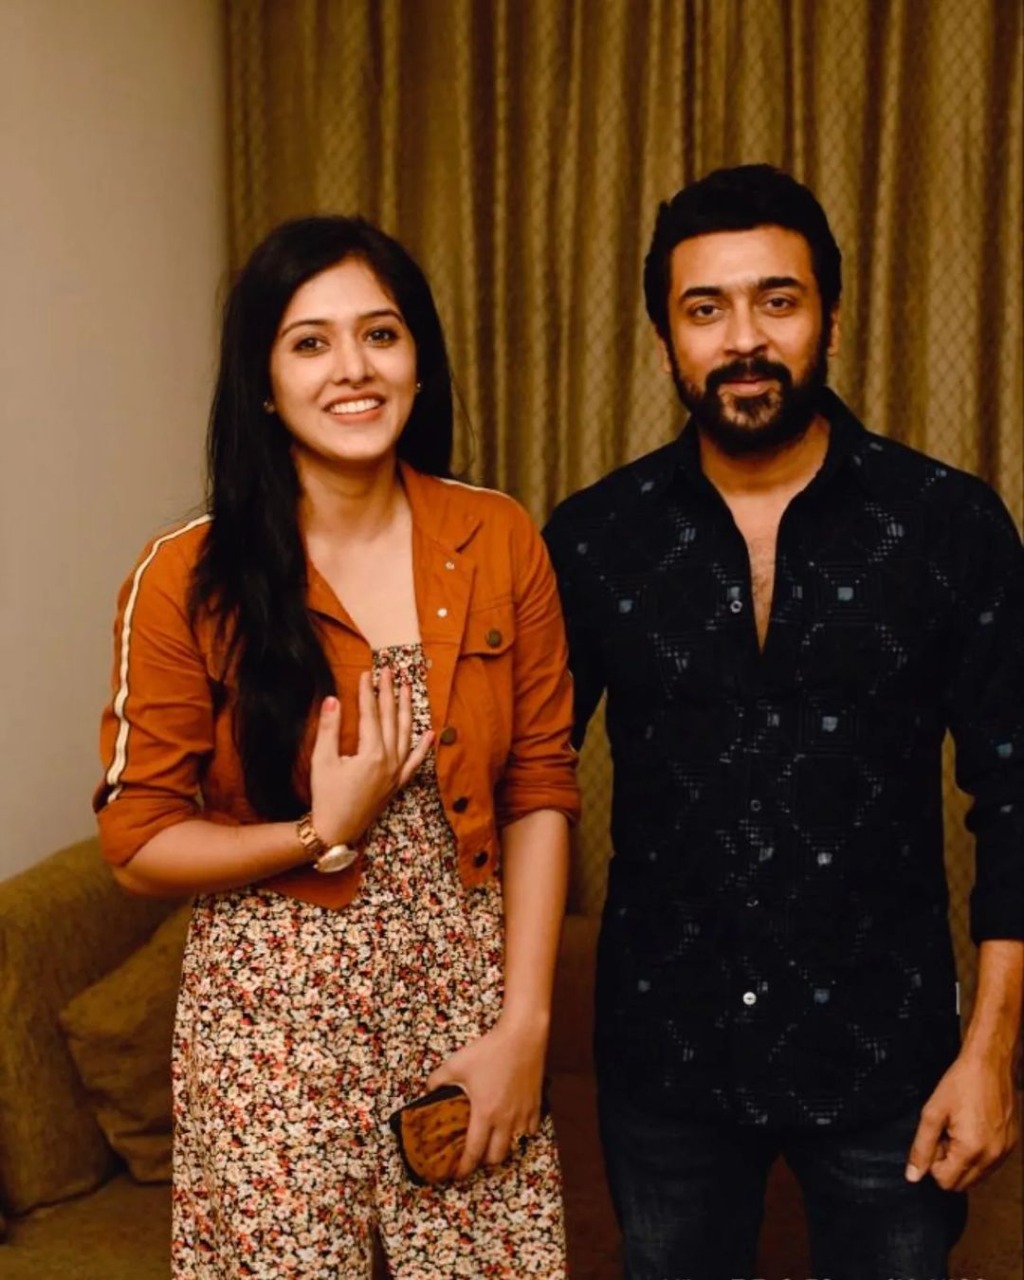 dream come true moment for Aadhya Prasad with ET suriya